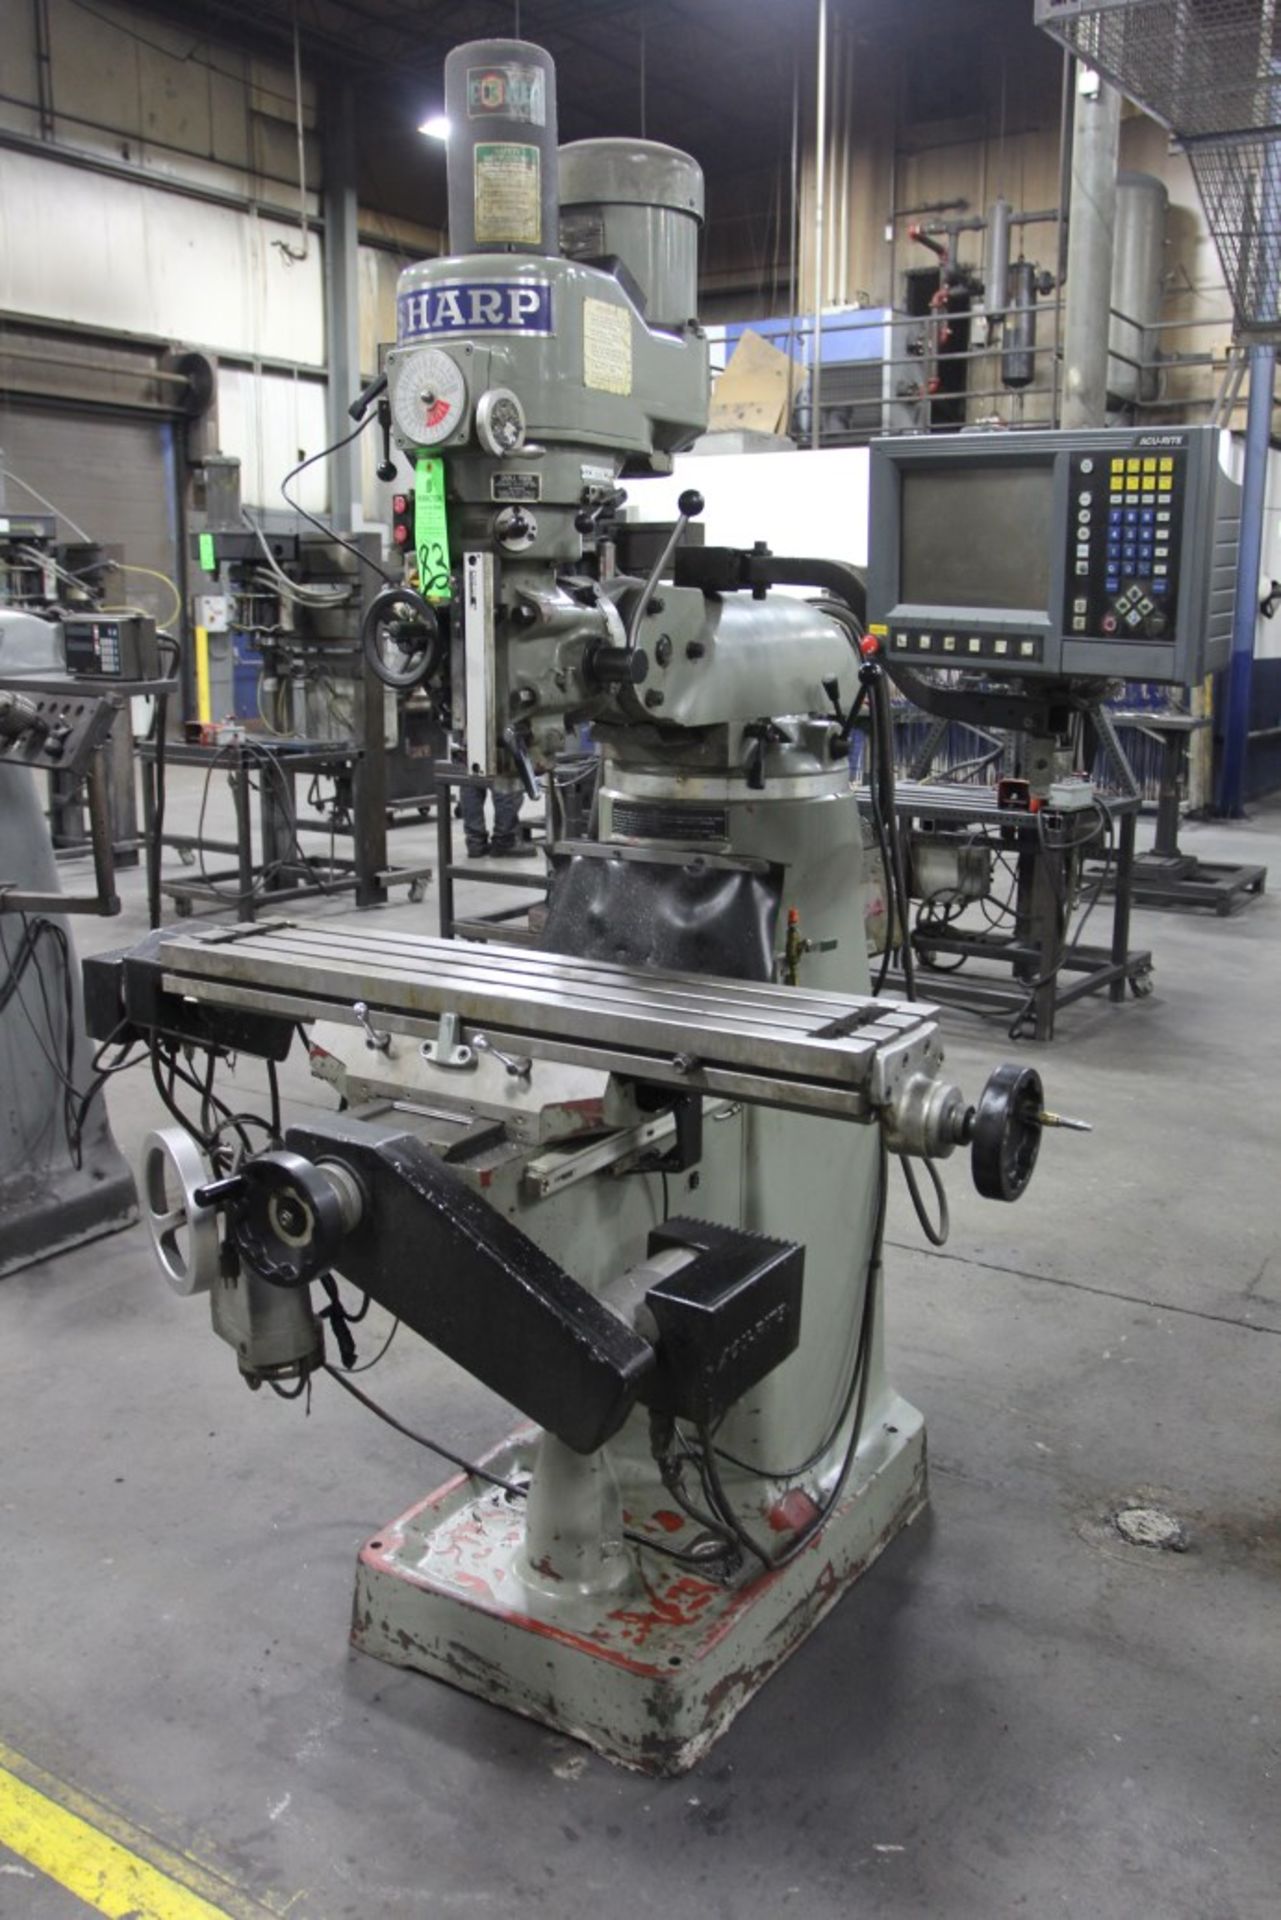 Sharp 3 HP CNC Mill, S/N. 20327571; Acu Rite MP2 Control; 9" x 42" Table; 60-4500 RPM - Image 2 of 5